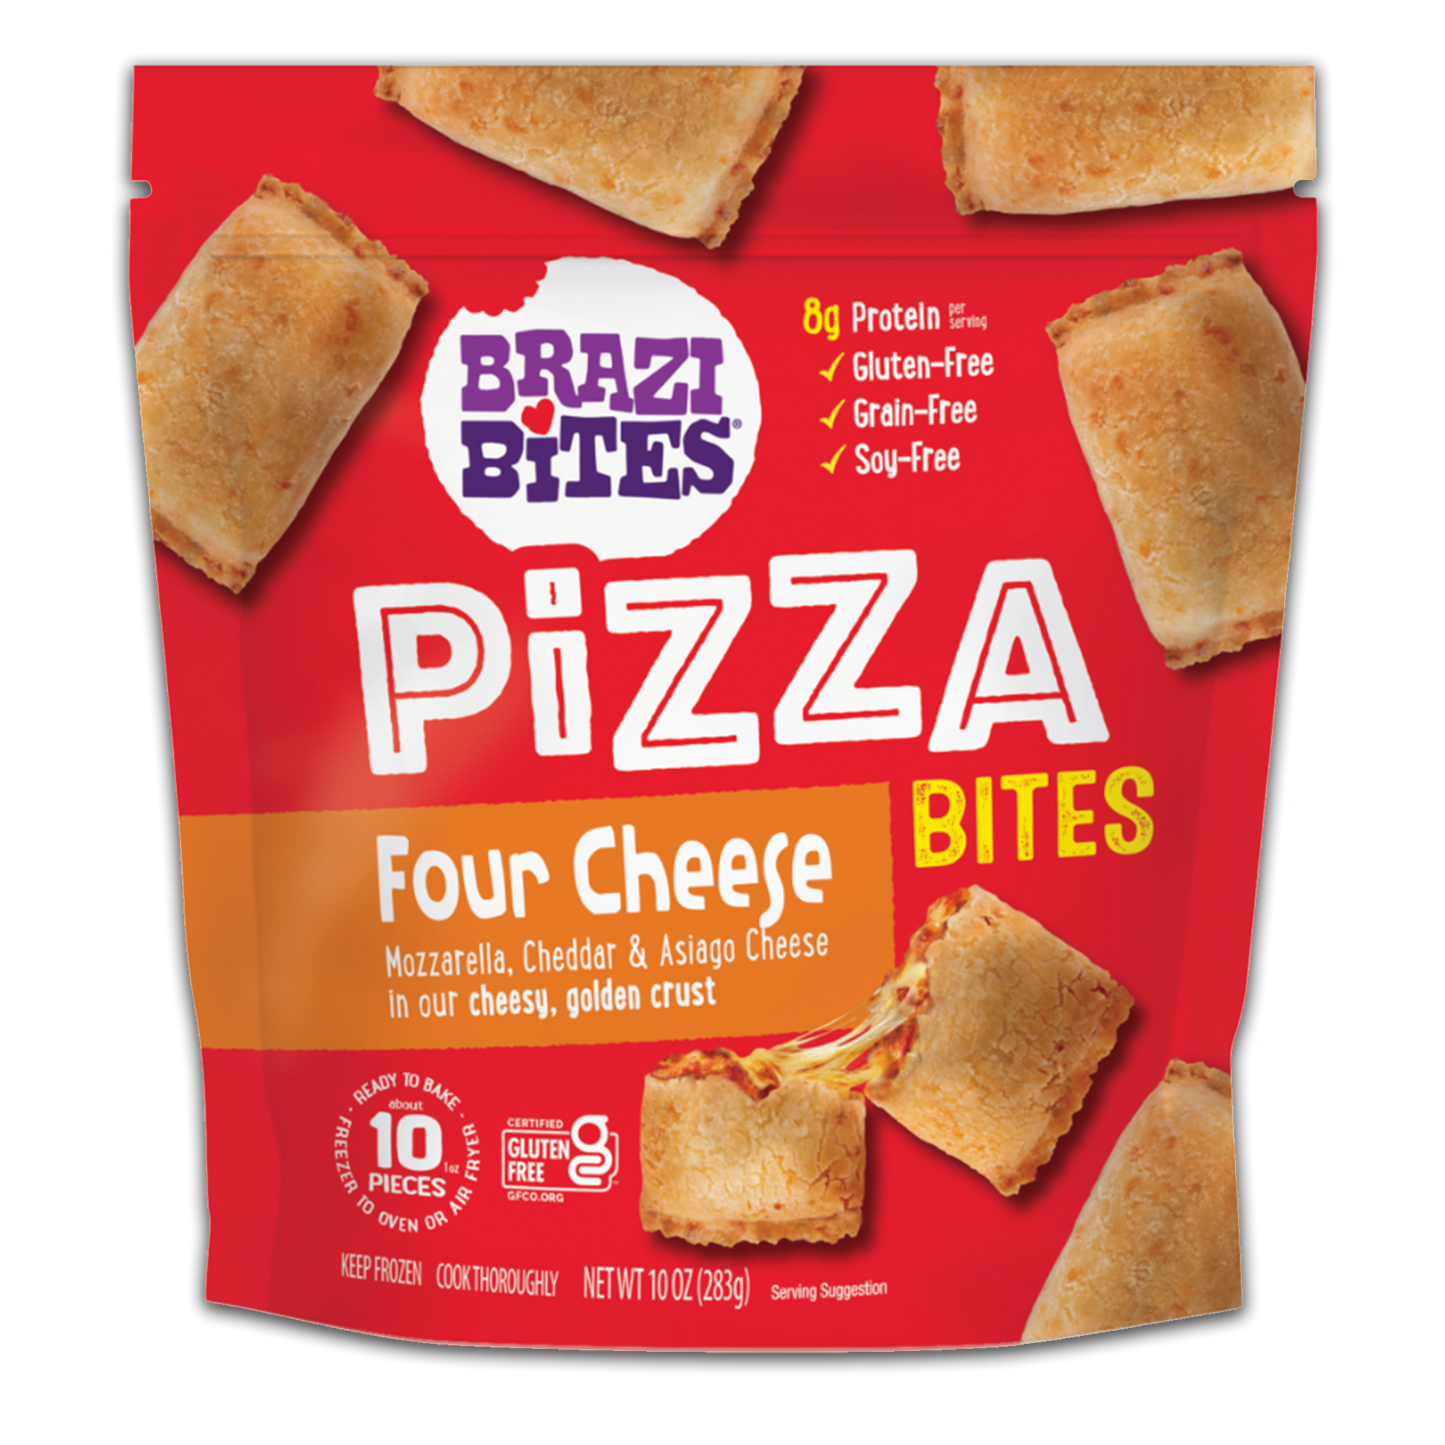 Brazi Bites Four Cheese Pizza Bites front of packaging